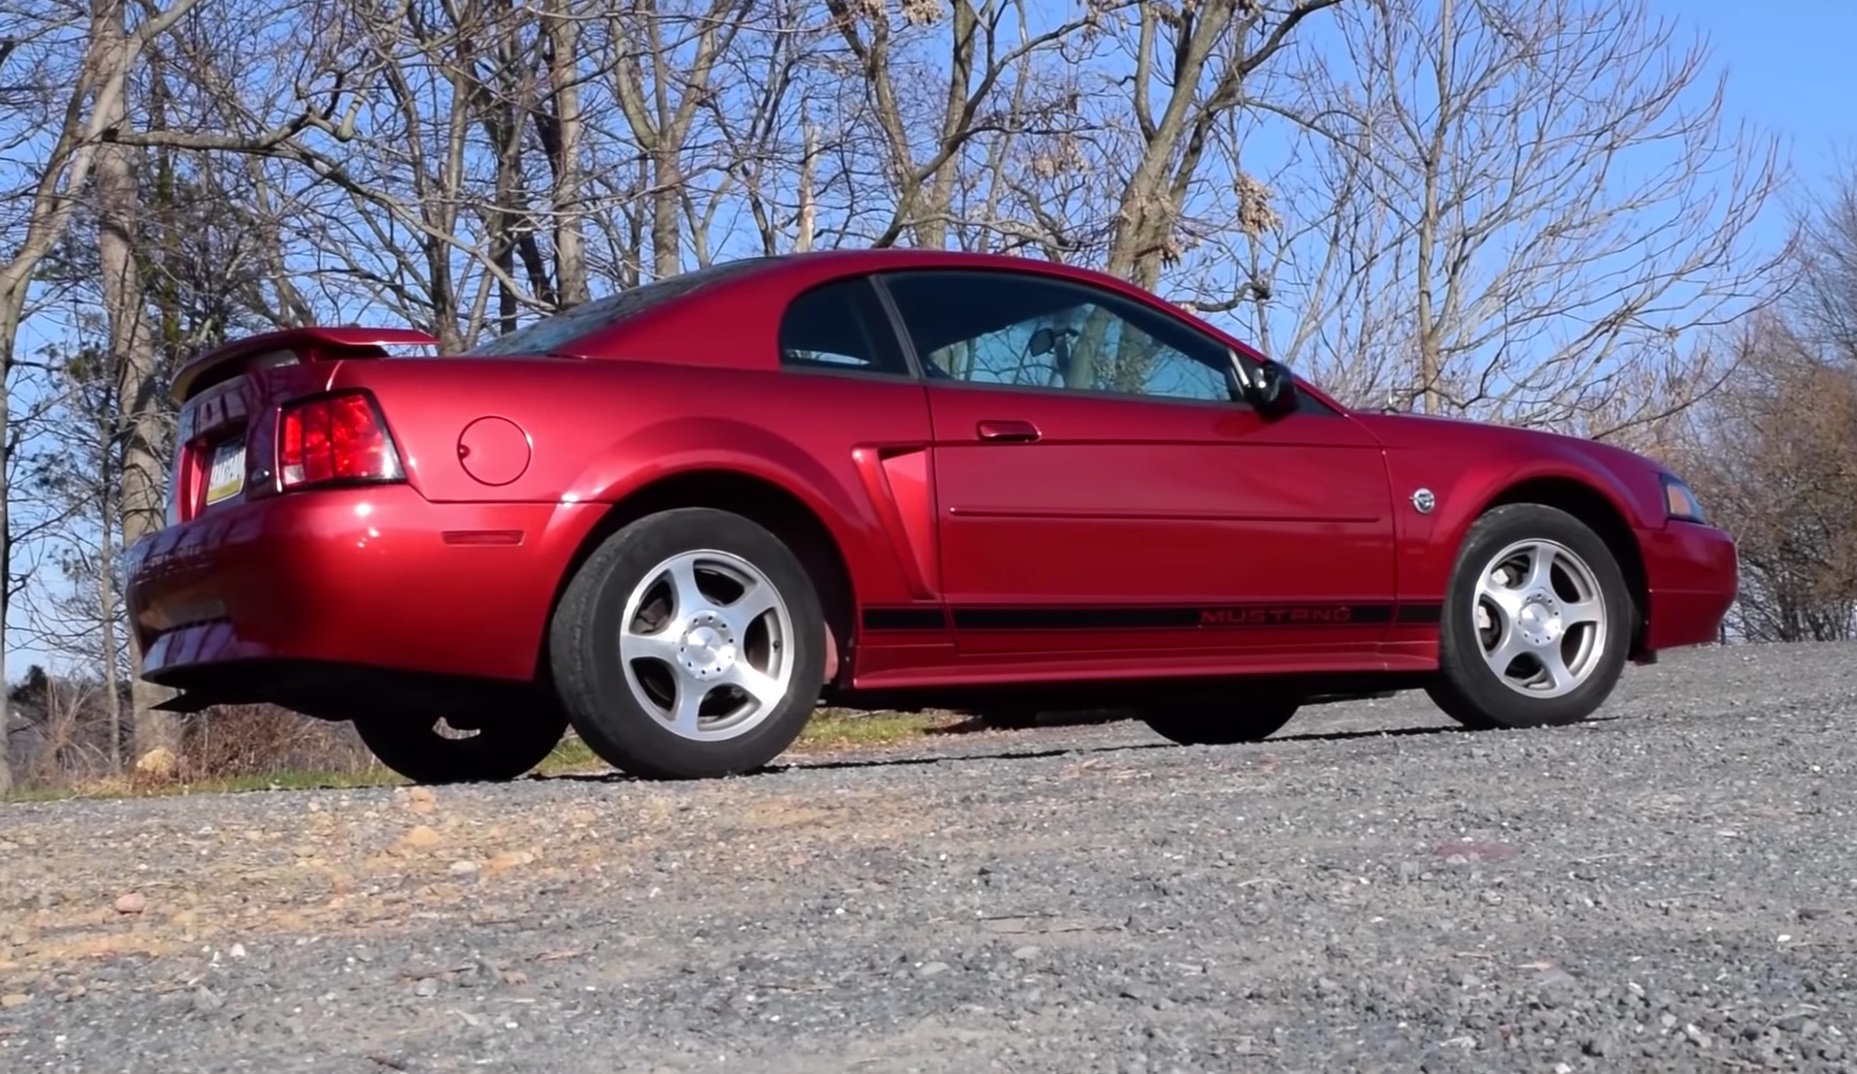 Video: 2004 Ford Mustang 40th Anniversary Trim Package Review